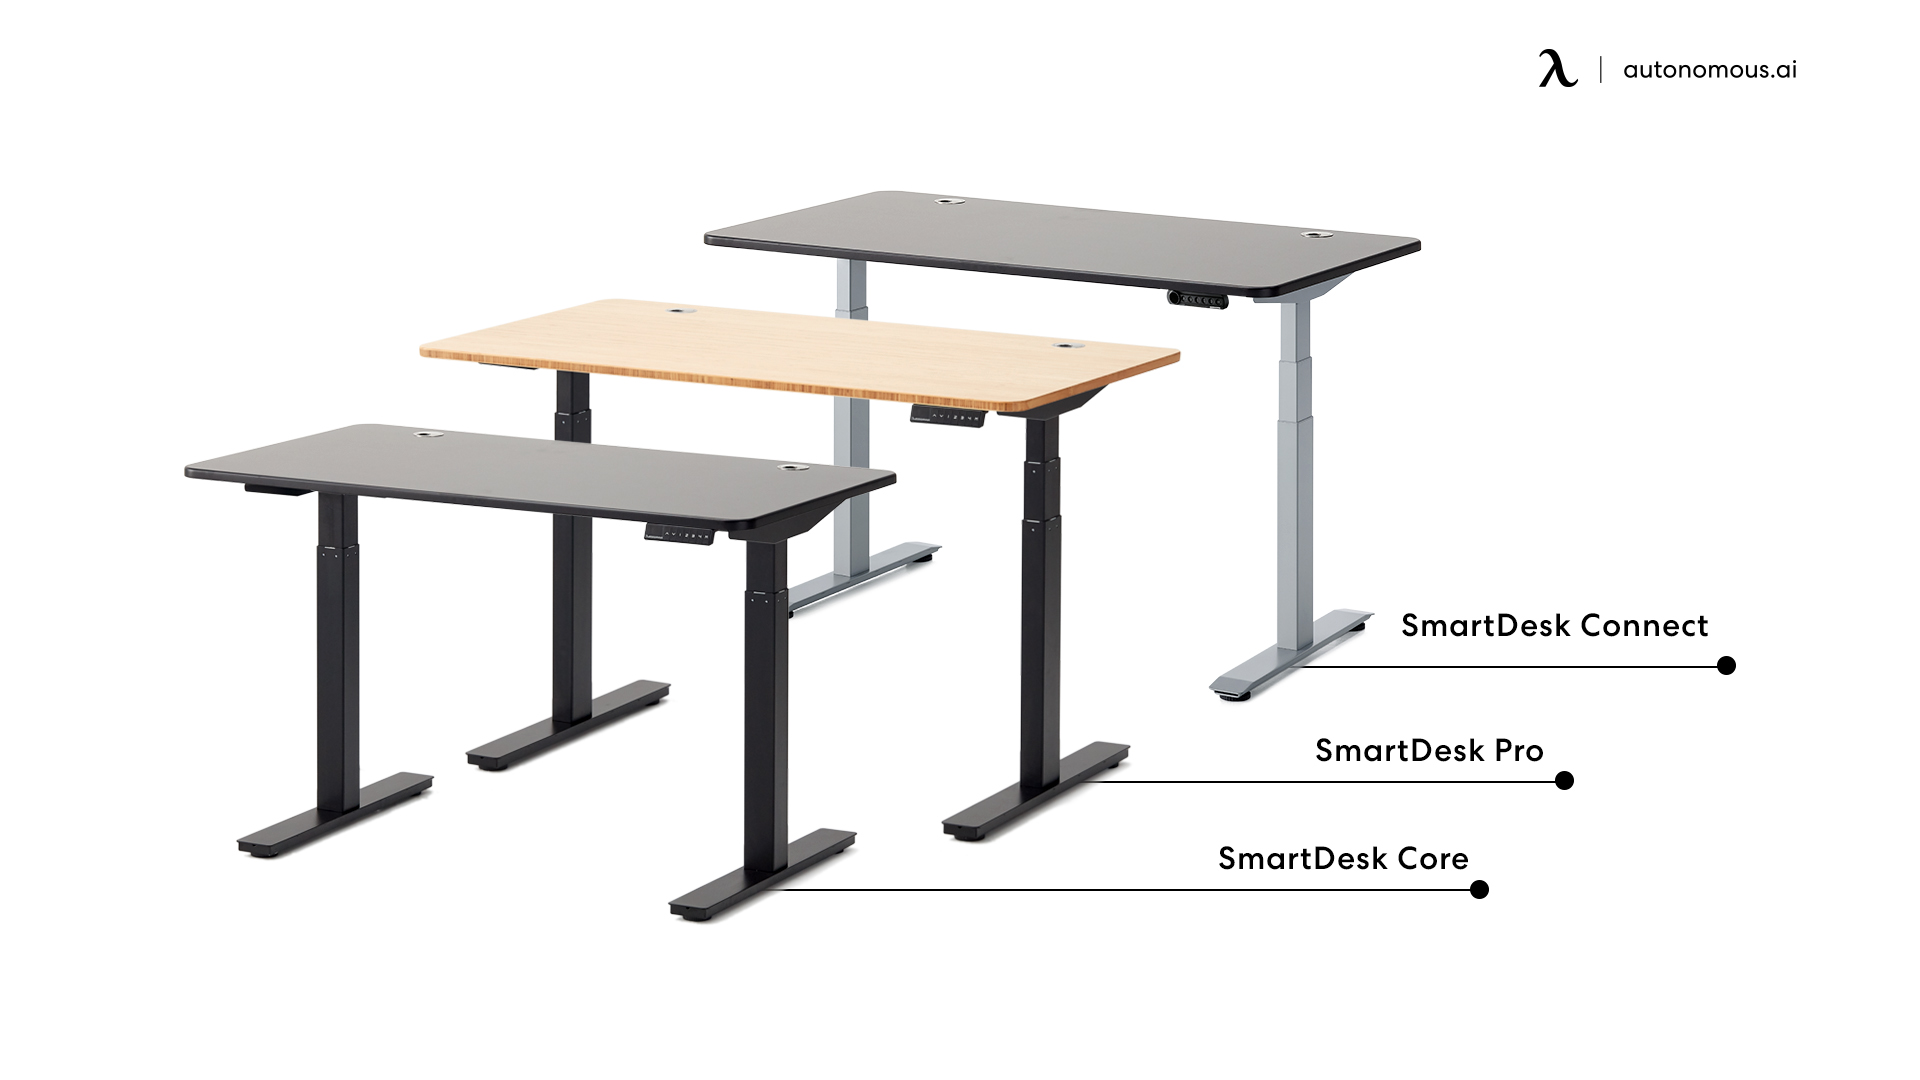 The SmartDesk for Red Argyle employee discount